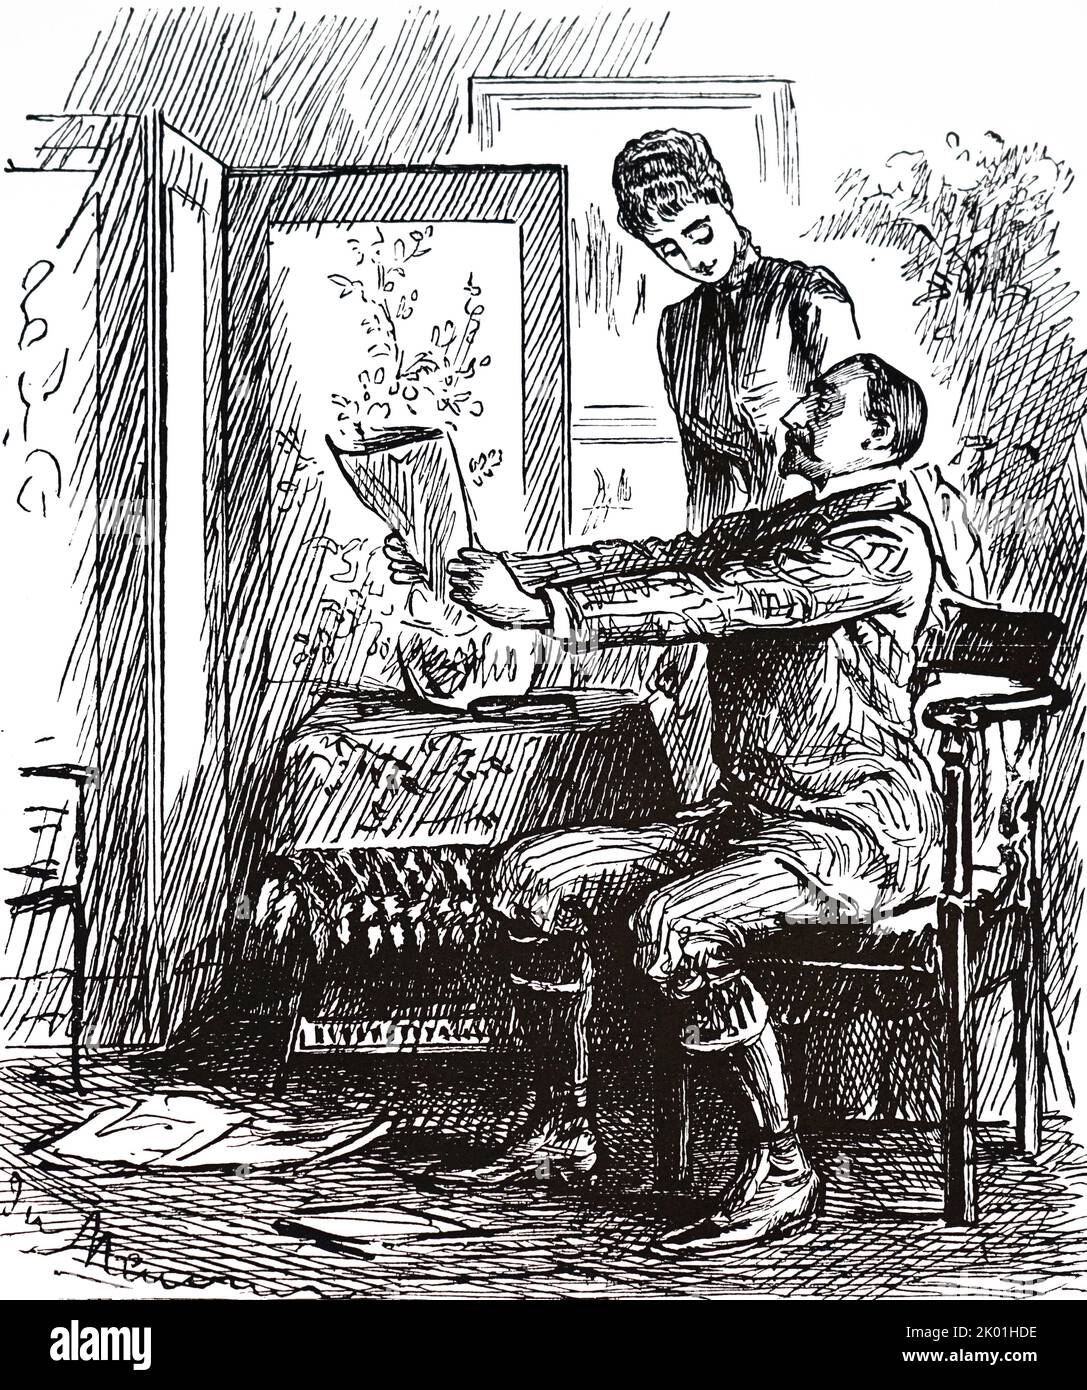 Presbyopia. Cartoon by George du Maurier from Punch, London, October 29, 1887. Stock Photo